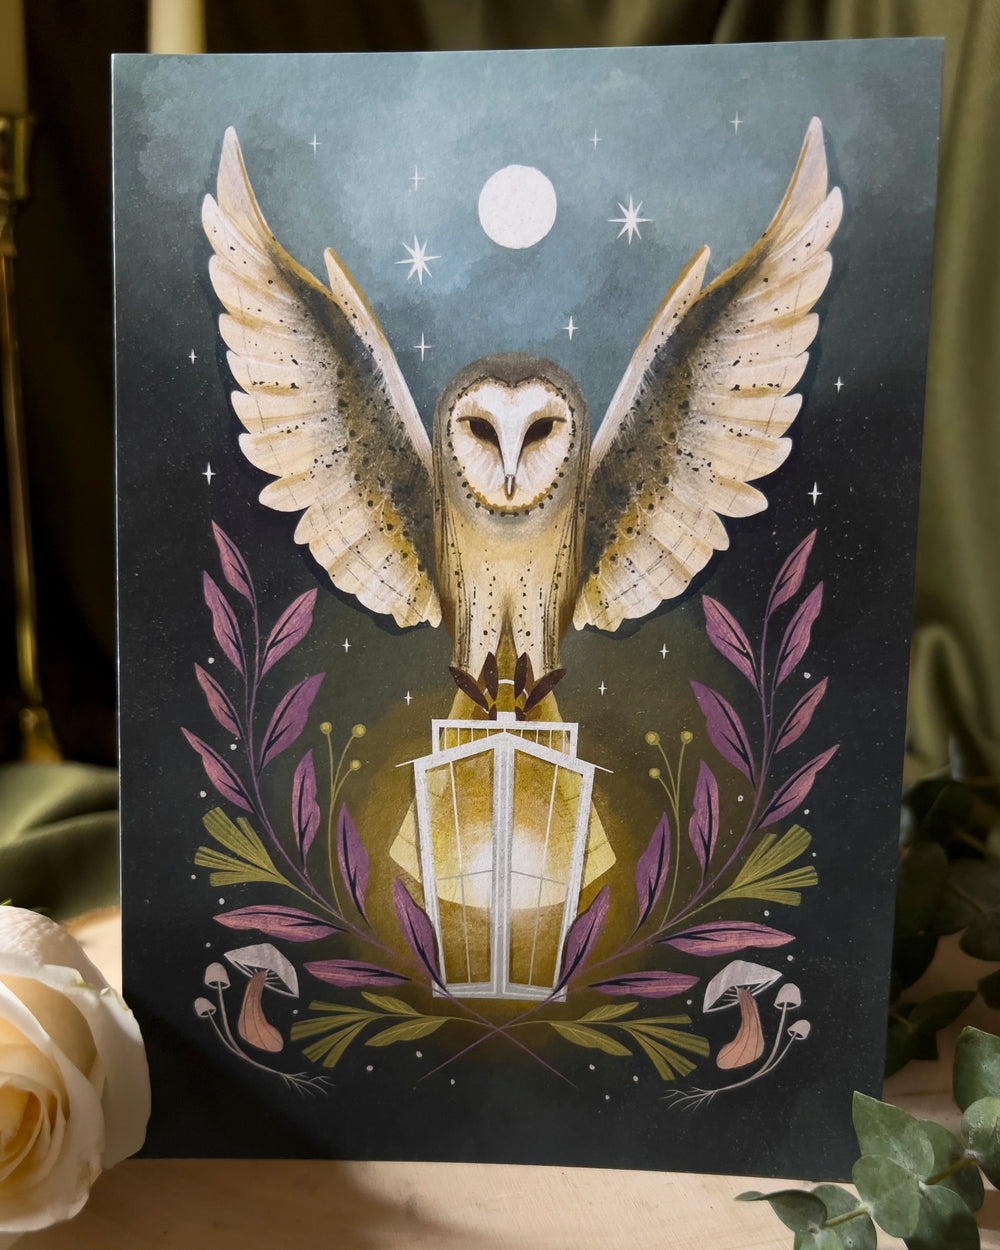 An art print depicting an owl carrying a lantern through the night with the moon above.